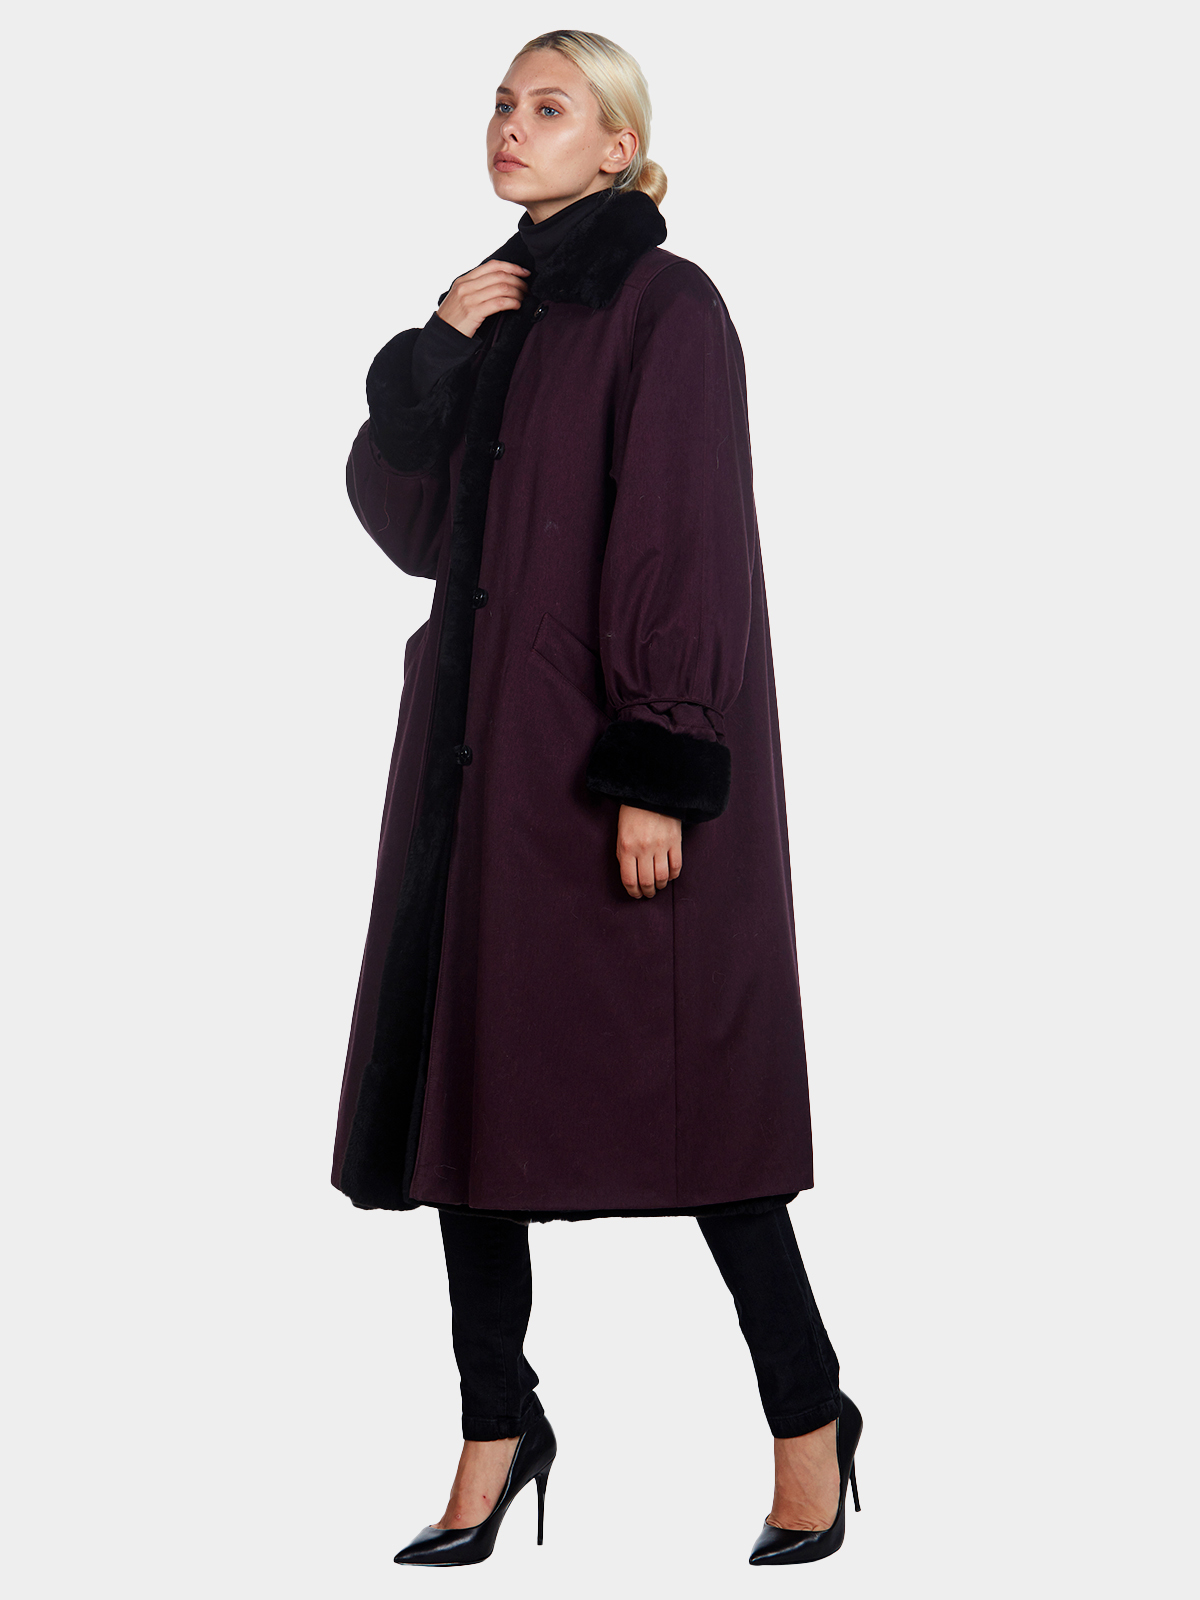 Woman's Reversible Burgundy Fabric with Sheared Nutria Coat